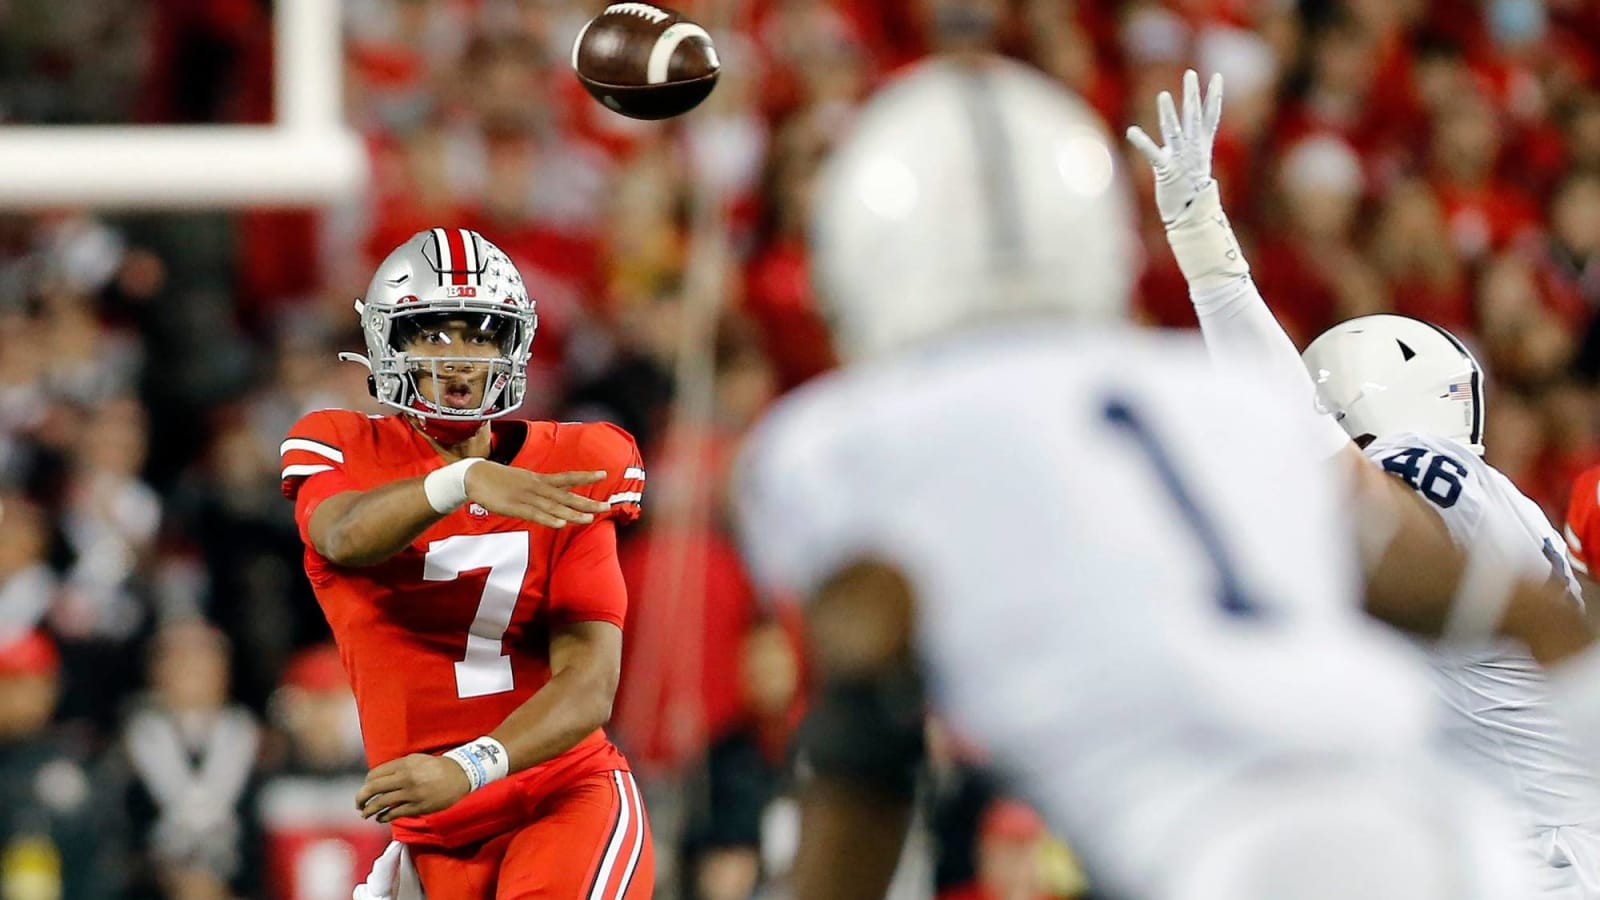 Ohio State stymies Penn State, keeps College Football Playoff hopes alive